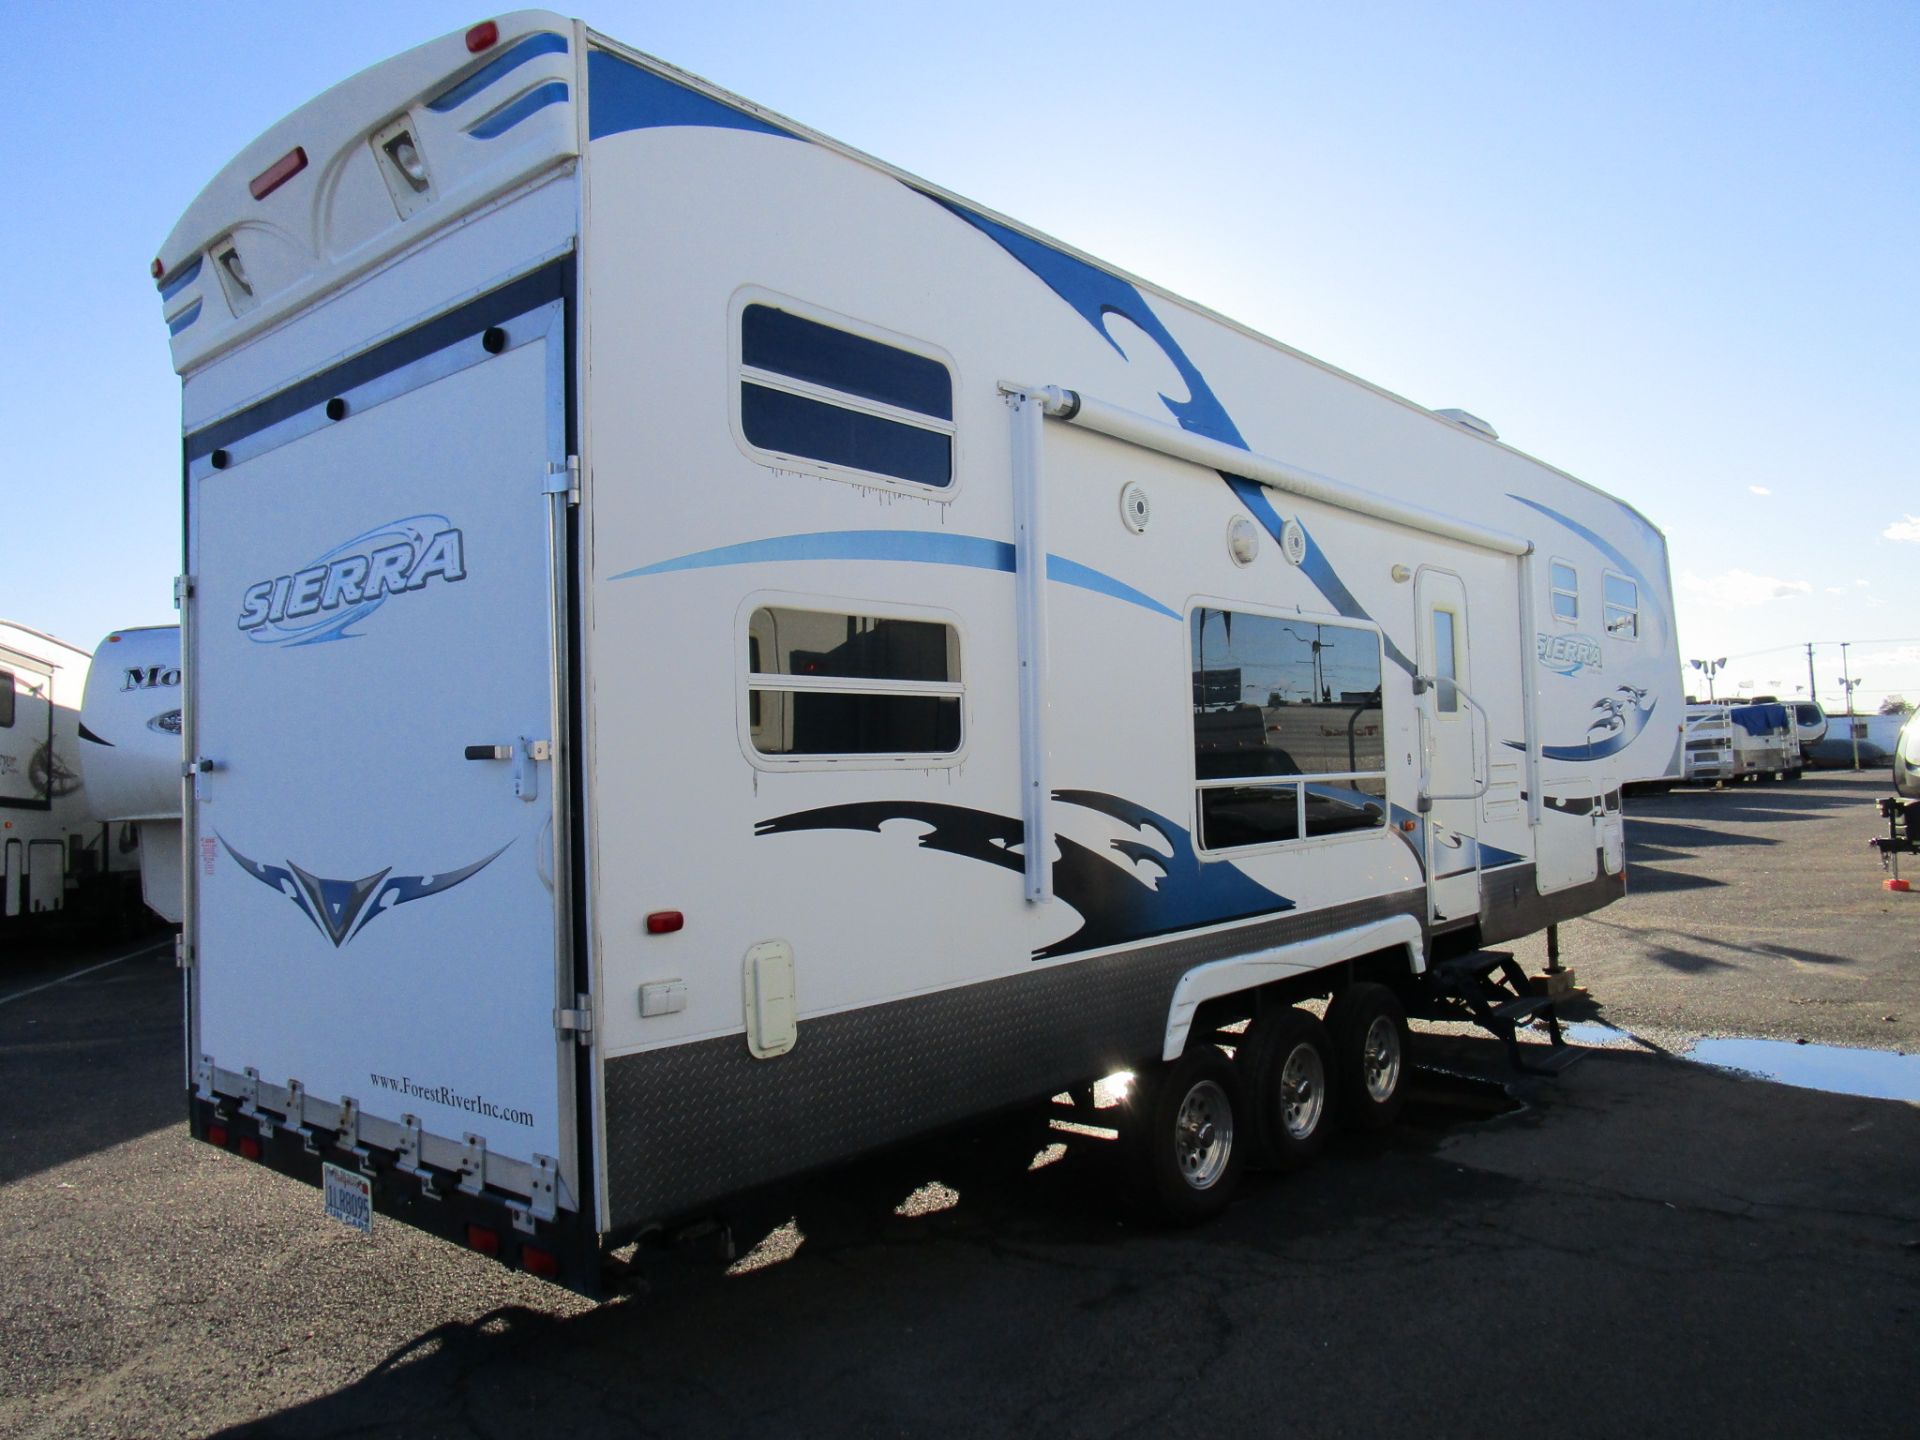 RV for sale: 2008 Forest River Sierra 5th Wheel Toy Hauler 34' in Lodi 2008 Forest River Sierra Fifth Wheel